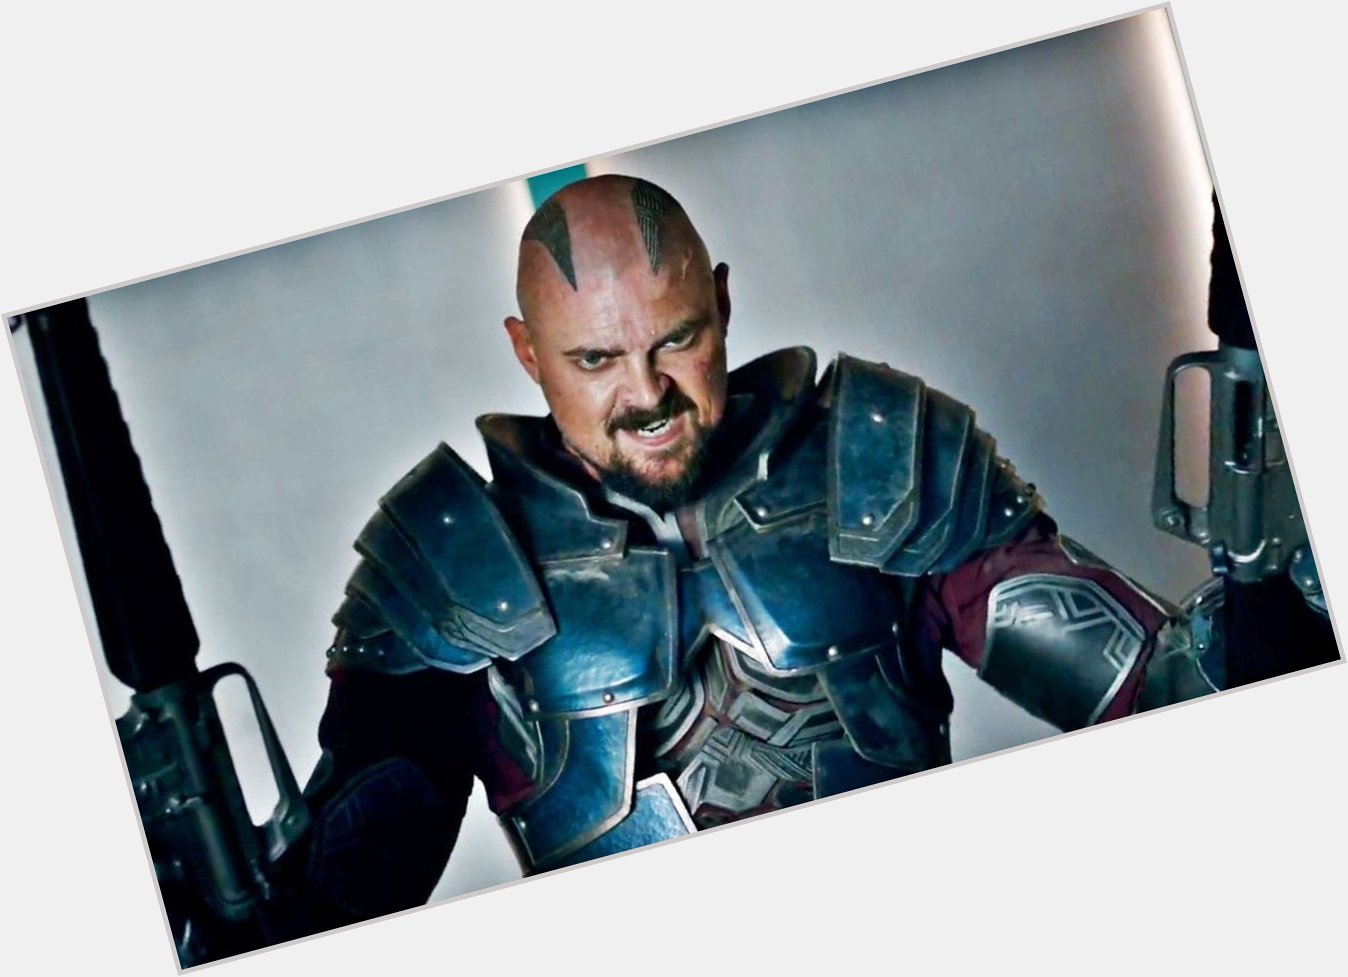 Happy birthday karl urban and thank you for playing one of the most badass characters on the boys 